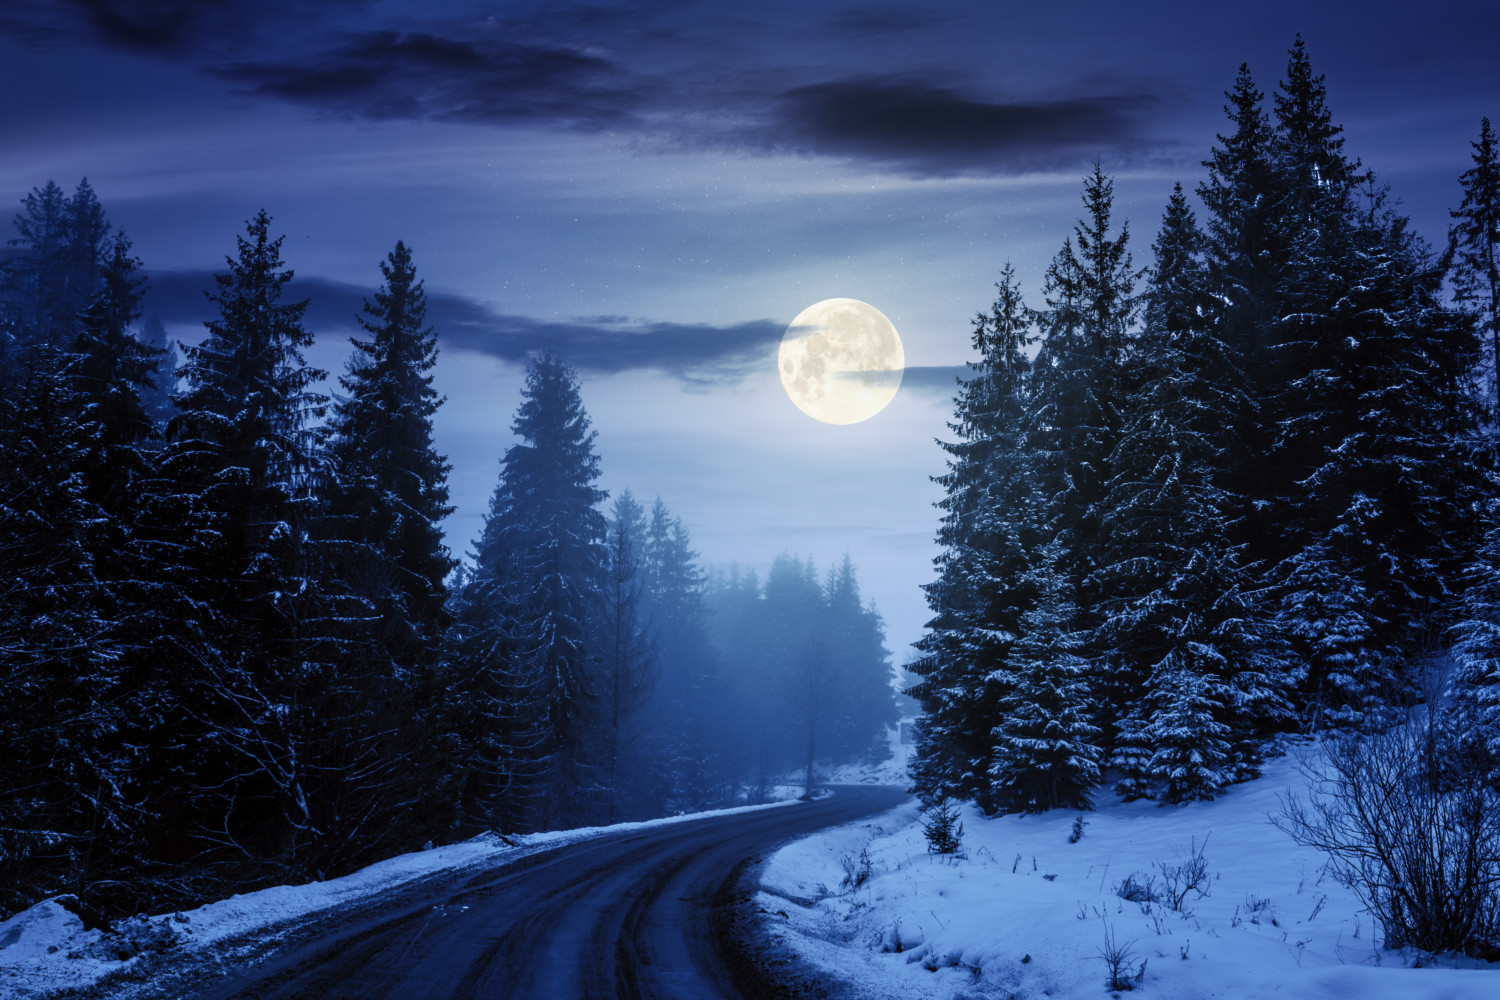 Full cold moon shining brightly at night in winter